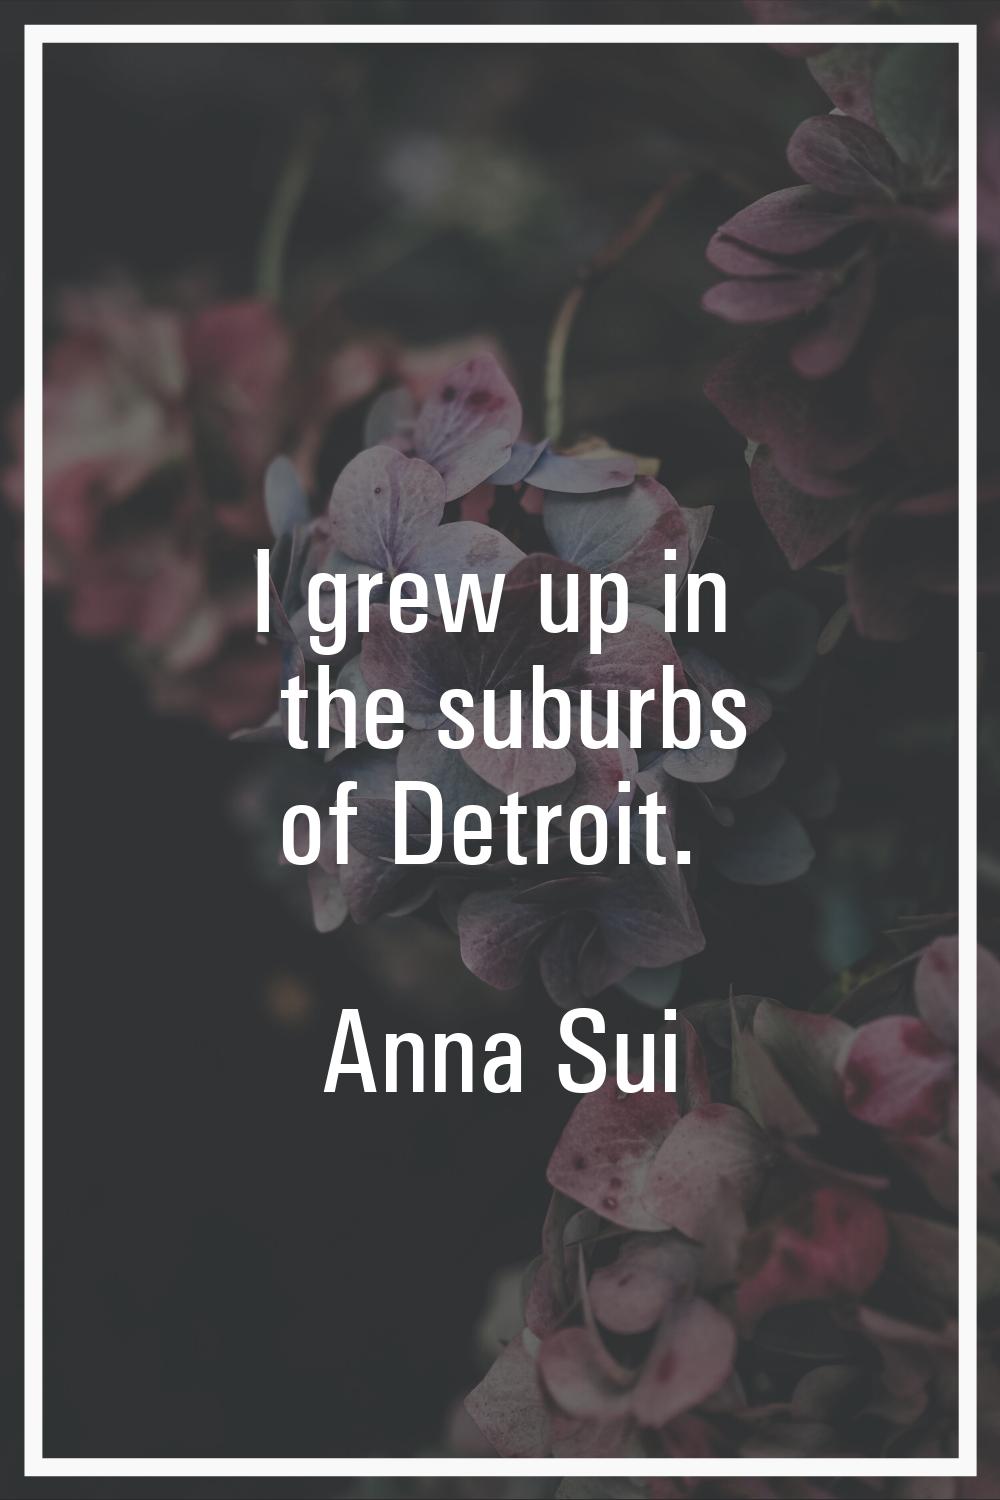 I grew up in the suburbs of Detroit.